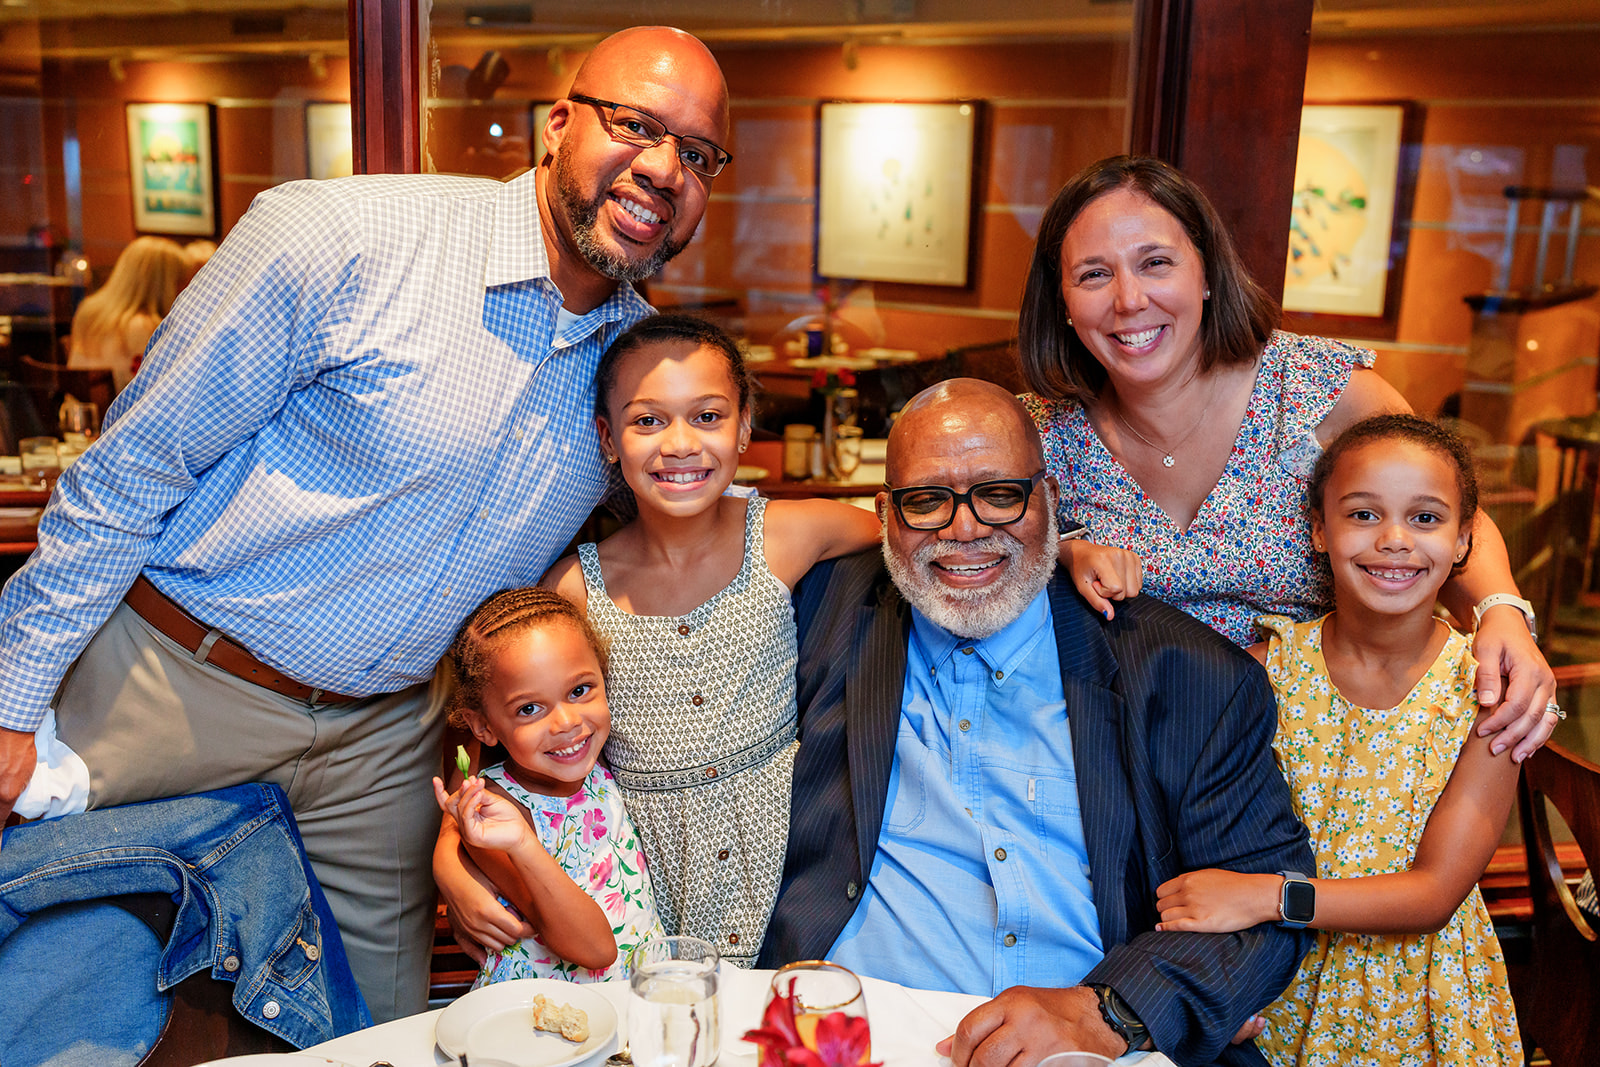 Charles Richards and family at his retirement ceremony in Annapolis Maryland at Carrol's Creek Café